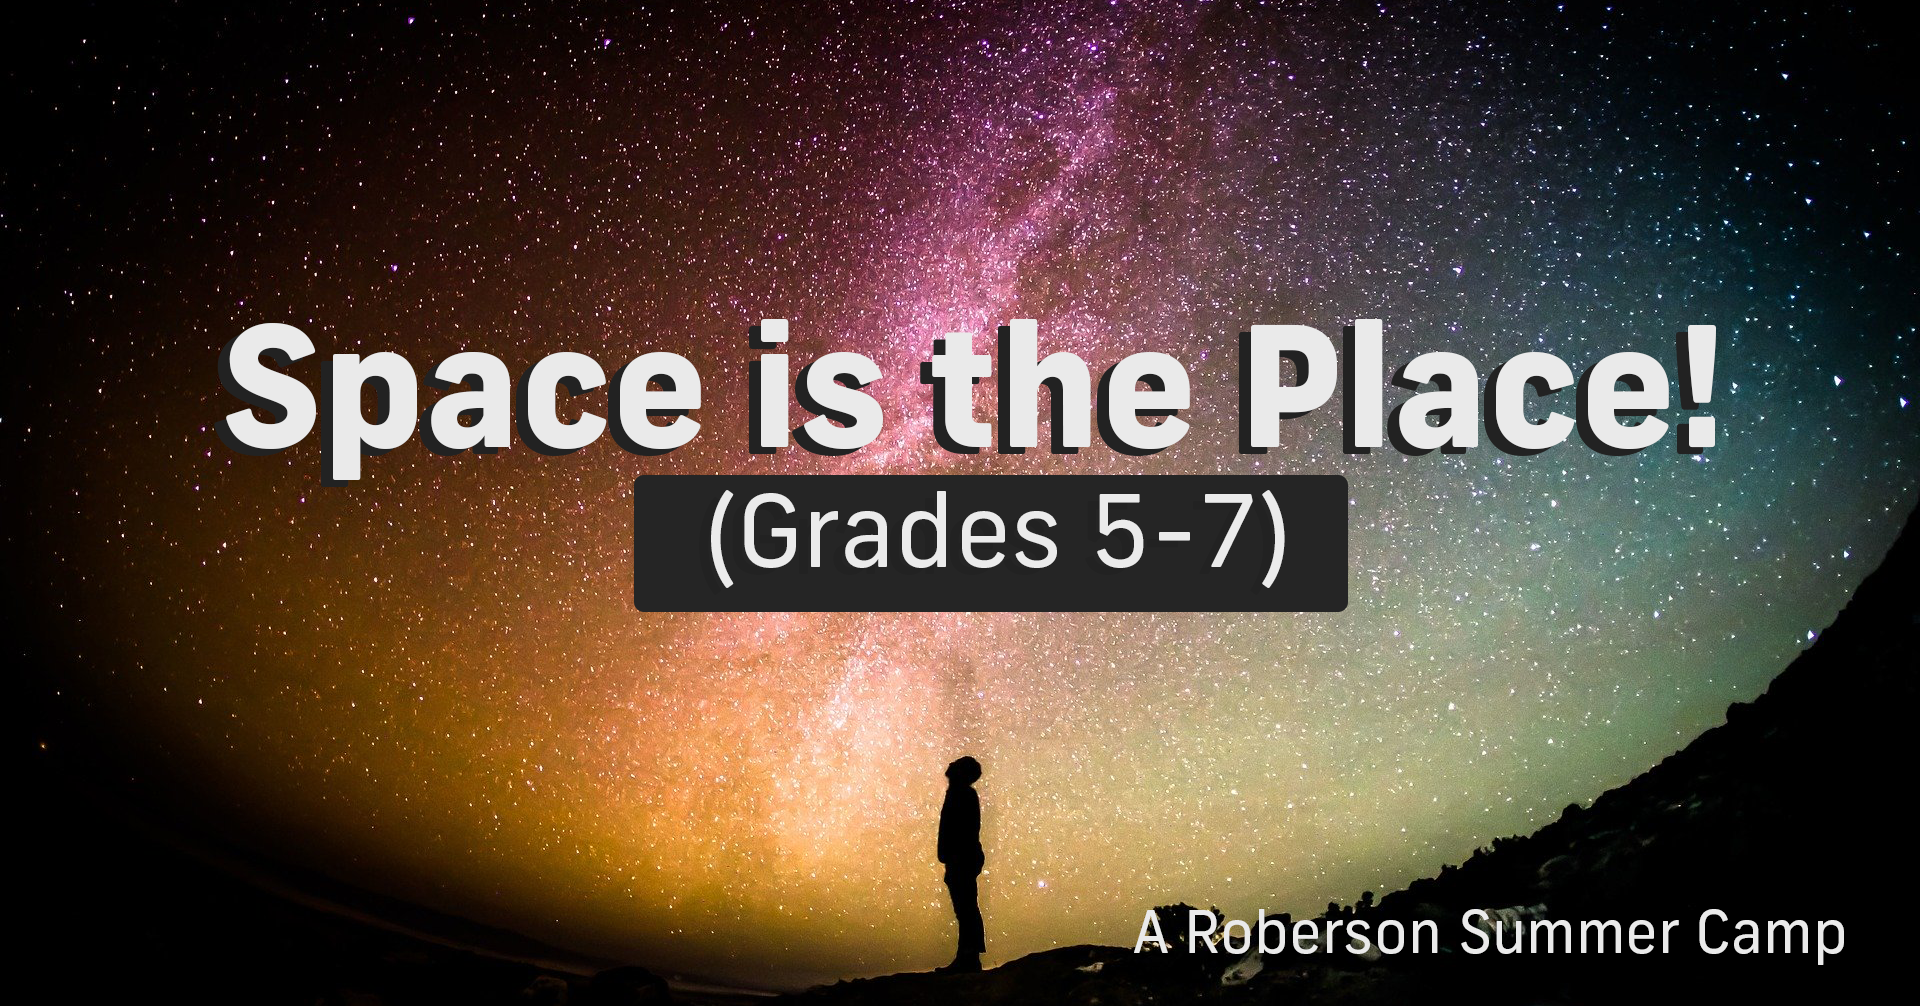 space is the place fro grades 5 - 7